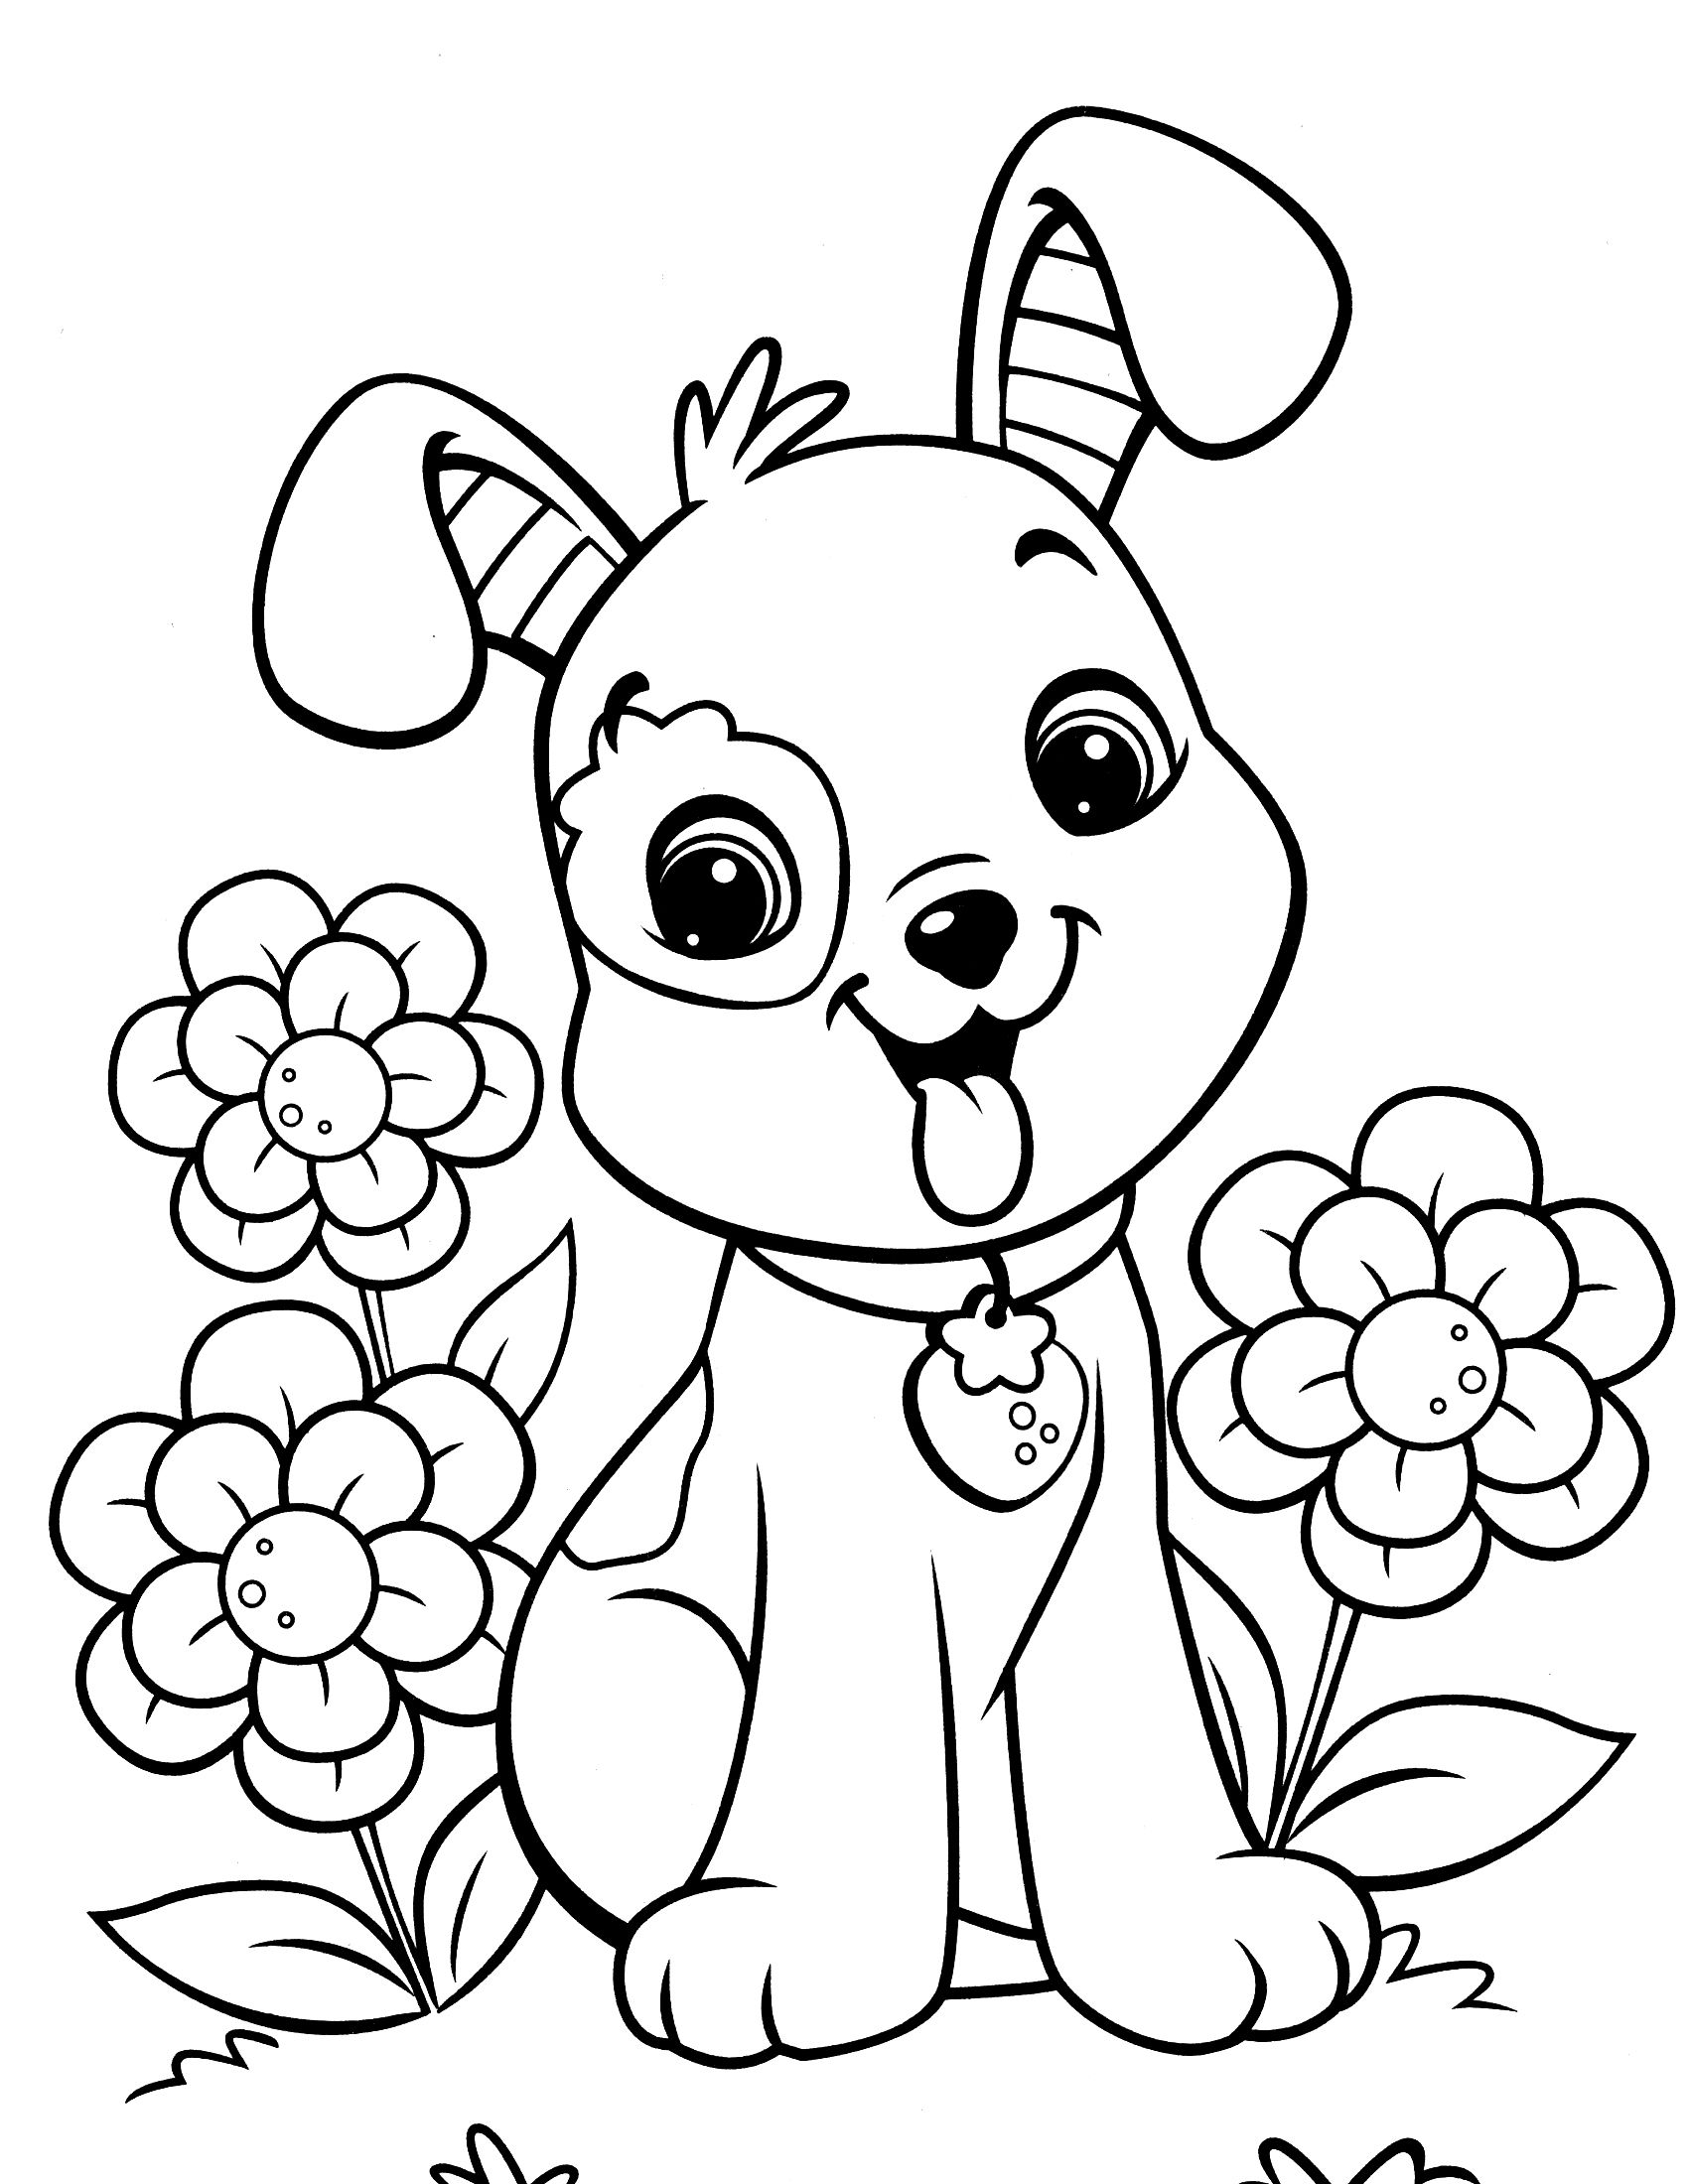 dog coloring pages | Coloring Pages for Kids